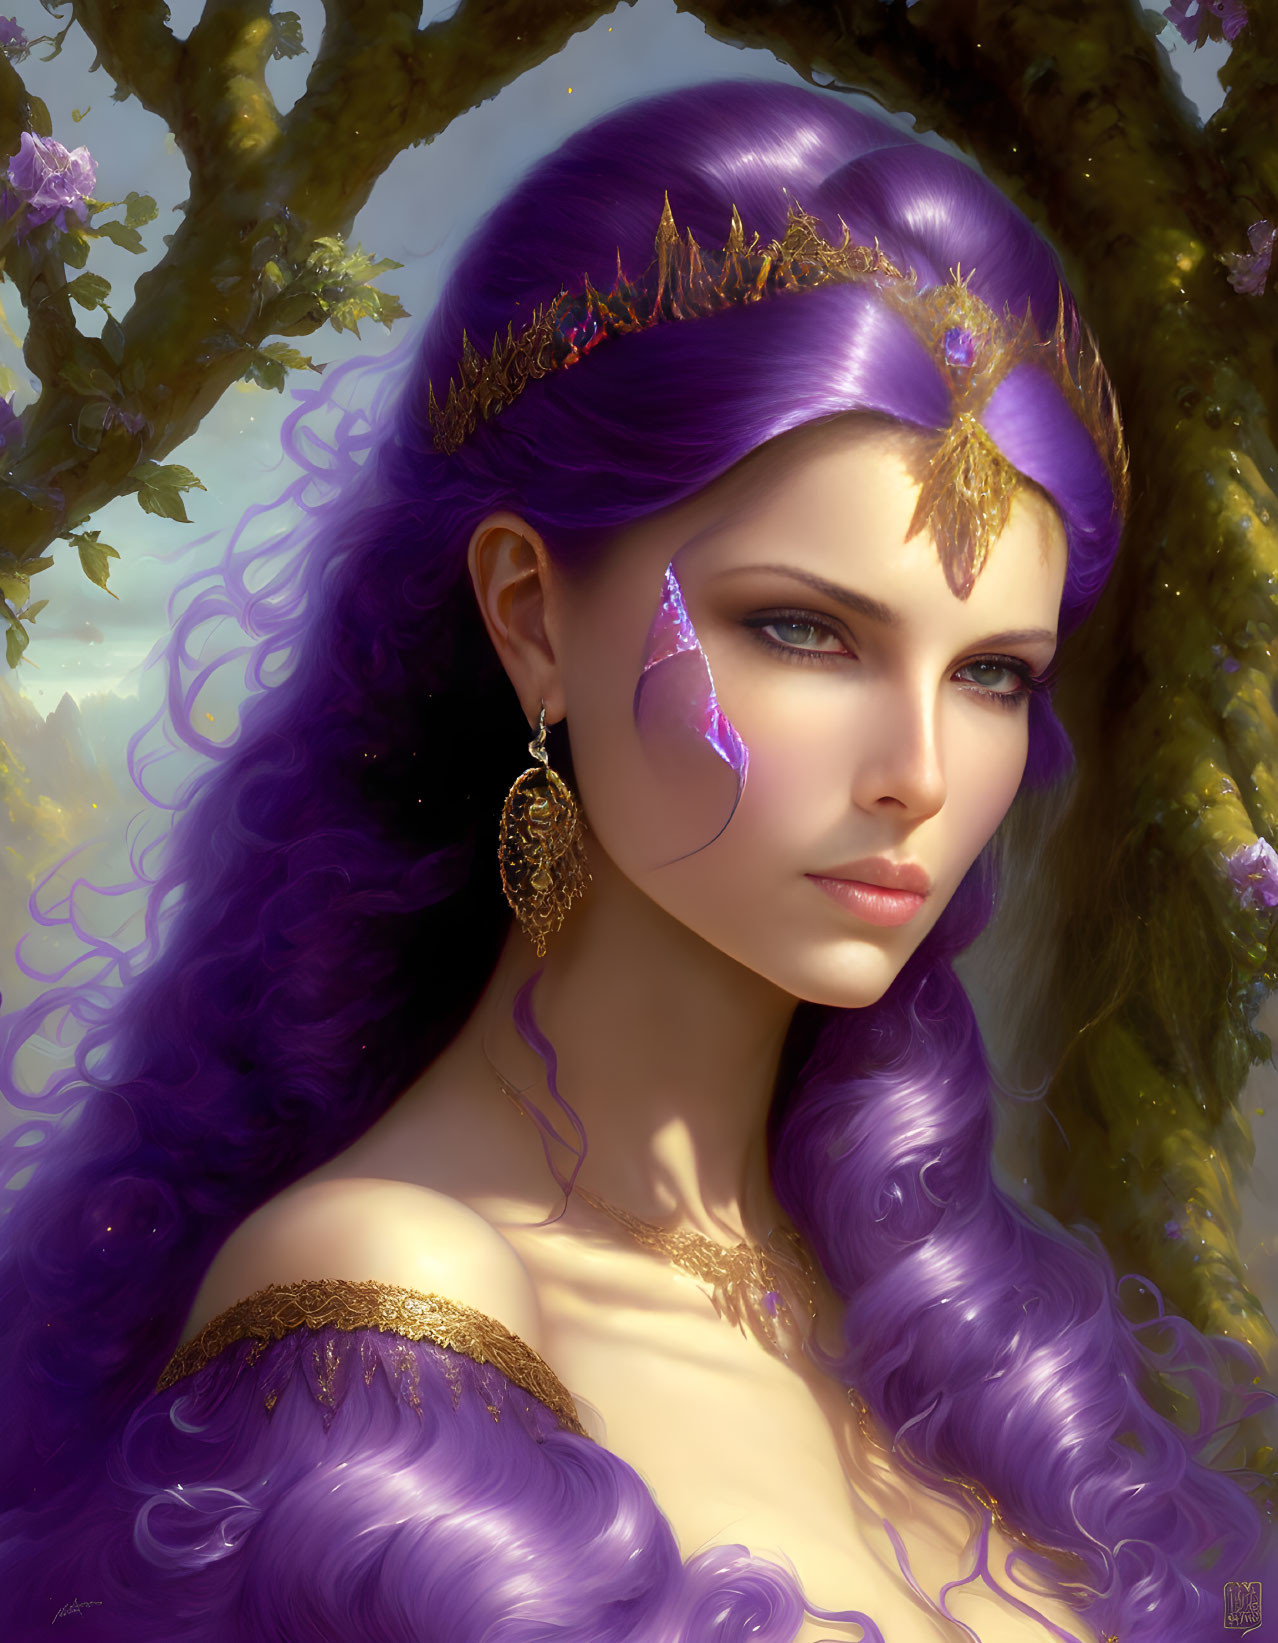 Portrait of Woman with Violet Hair, Blue Eyes, and Golden Tiara